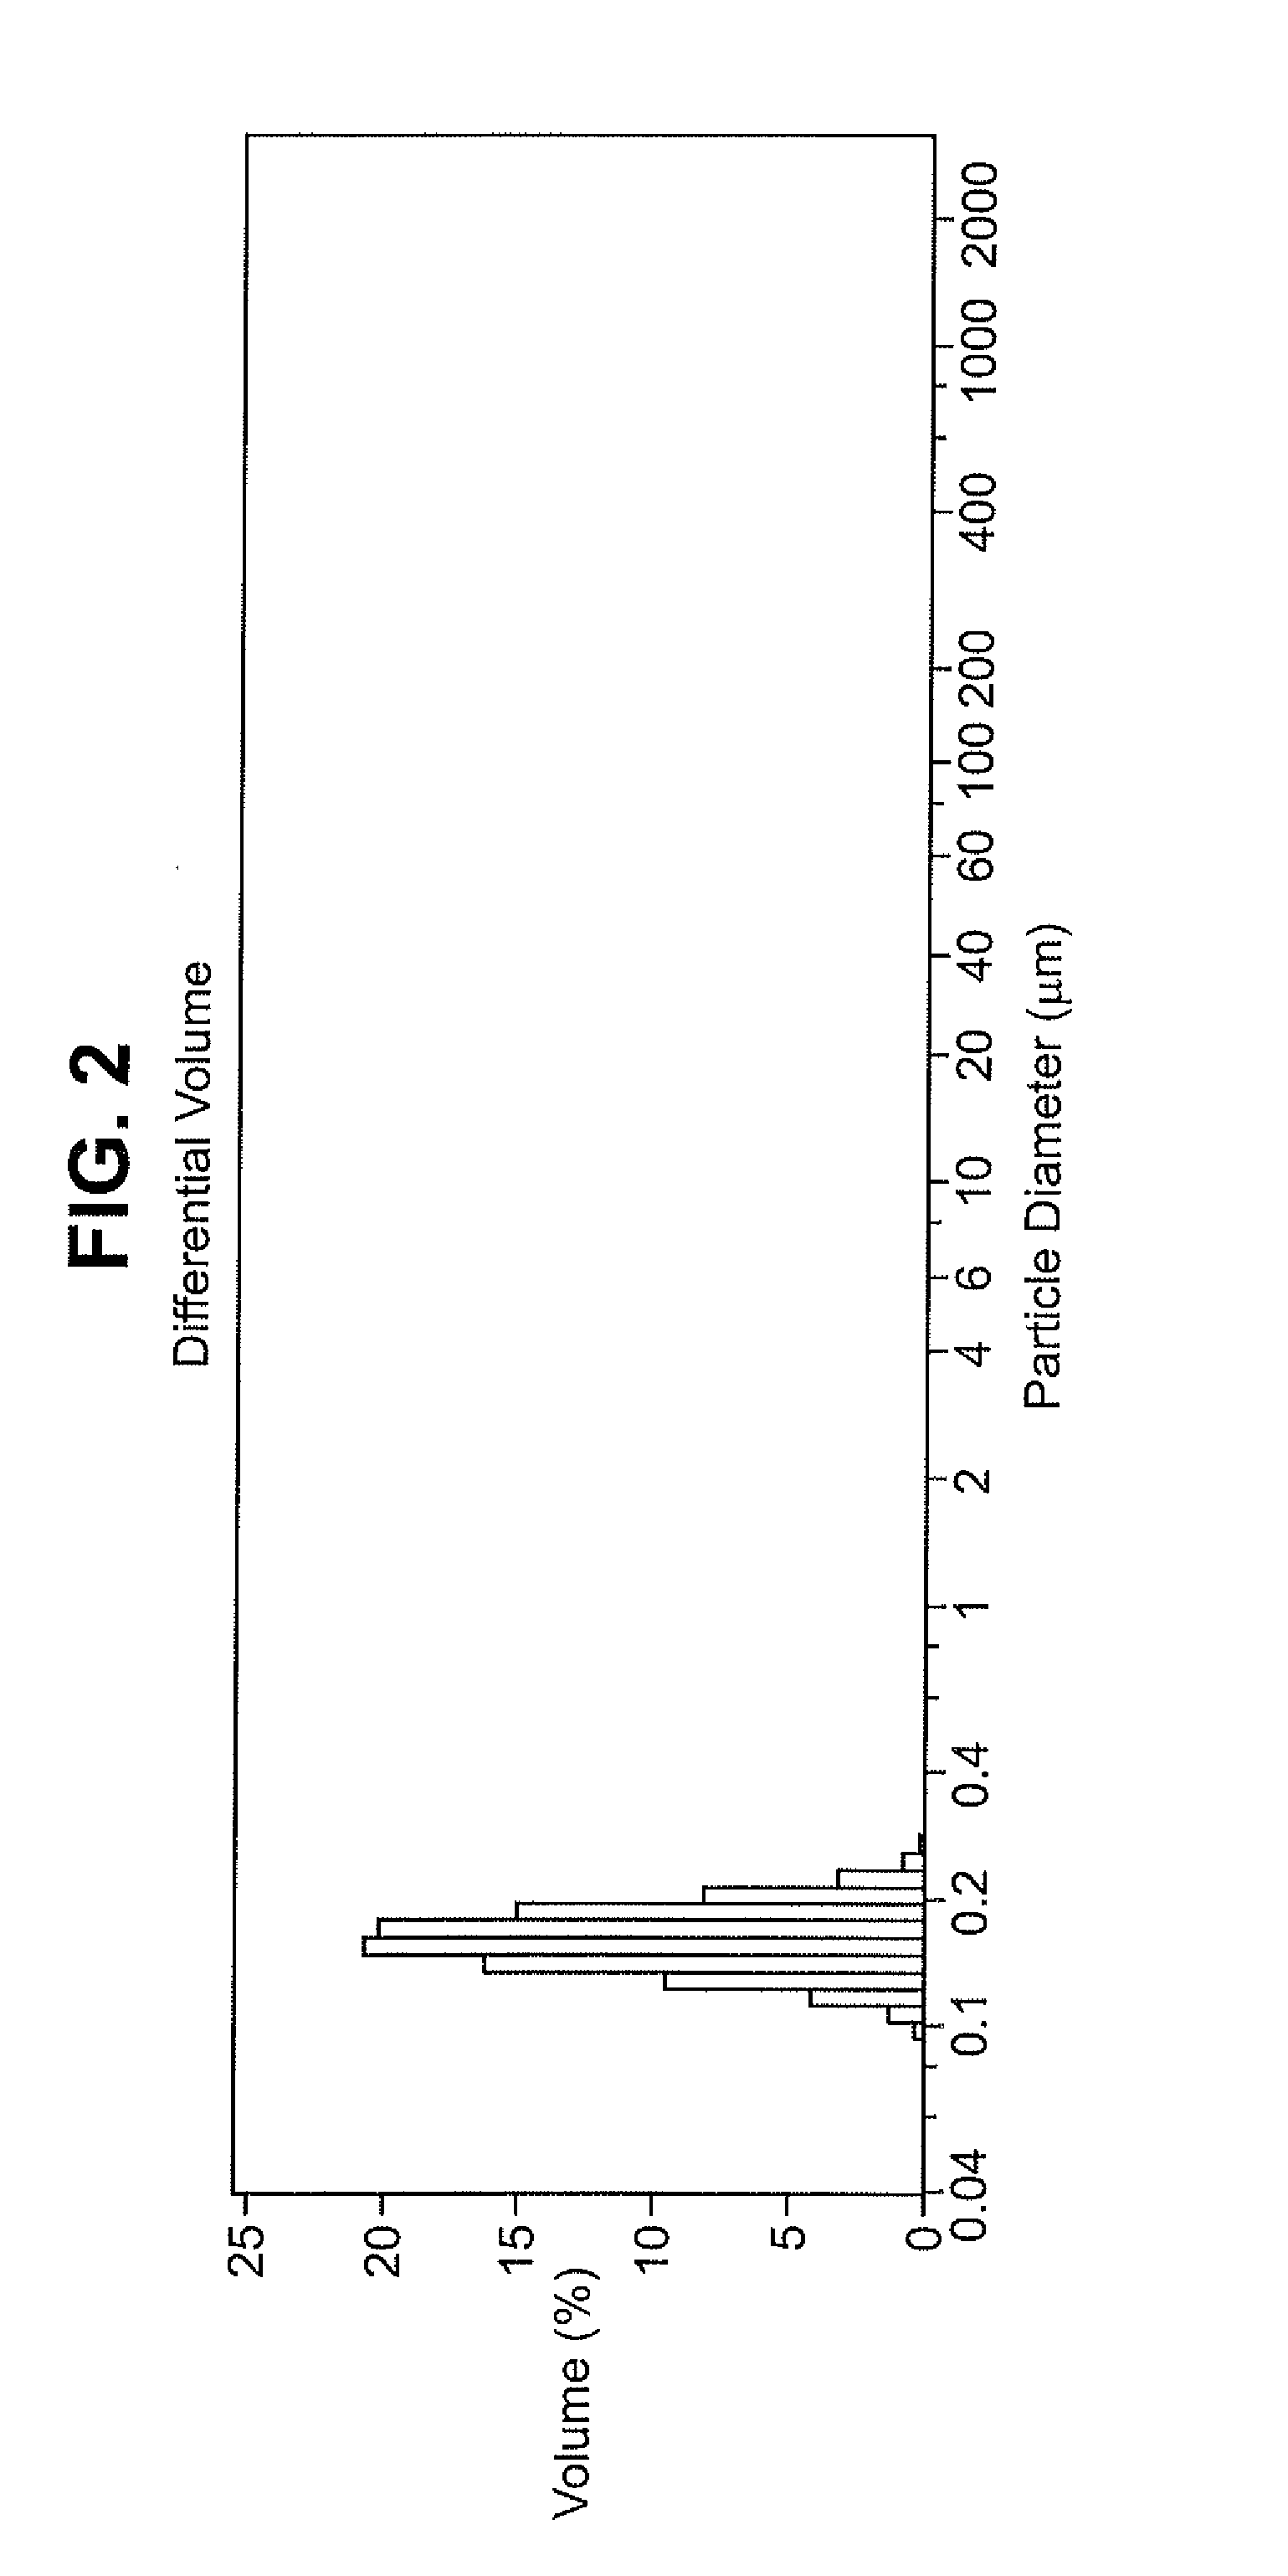 Redispersible polymer powders stabilized with protective colloid compositions